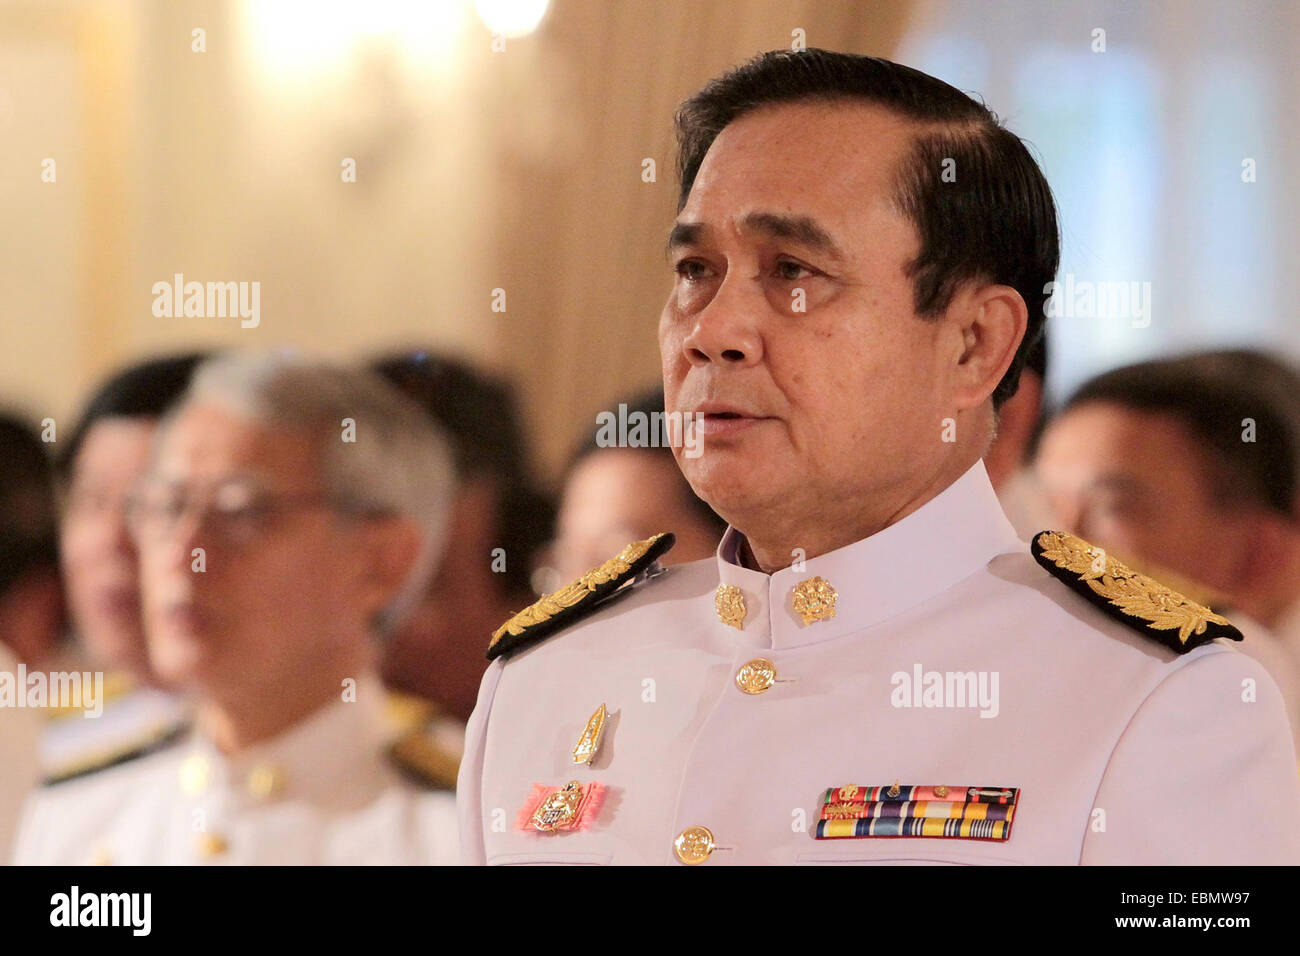 Bangkok, Thailand. 3rd Dec, 2014. Thai Prime Minister Gen. Prayuth Chan-ocha attends the oath swearing ceremony of allegiance to be good government officials as part of the King Bhumibol Adulyadej's upcoming 87th birthday celebration at Government House in Bangkok, Thailand, Dec. 3, 2014. Thai King Bhumibol Adulyadej would celebrate his 87th birthday on Dec. 5. Credit:  Rachen Sageamsak/Xinhua/Alamy Live News Stock Photo